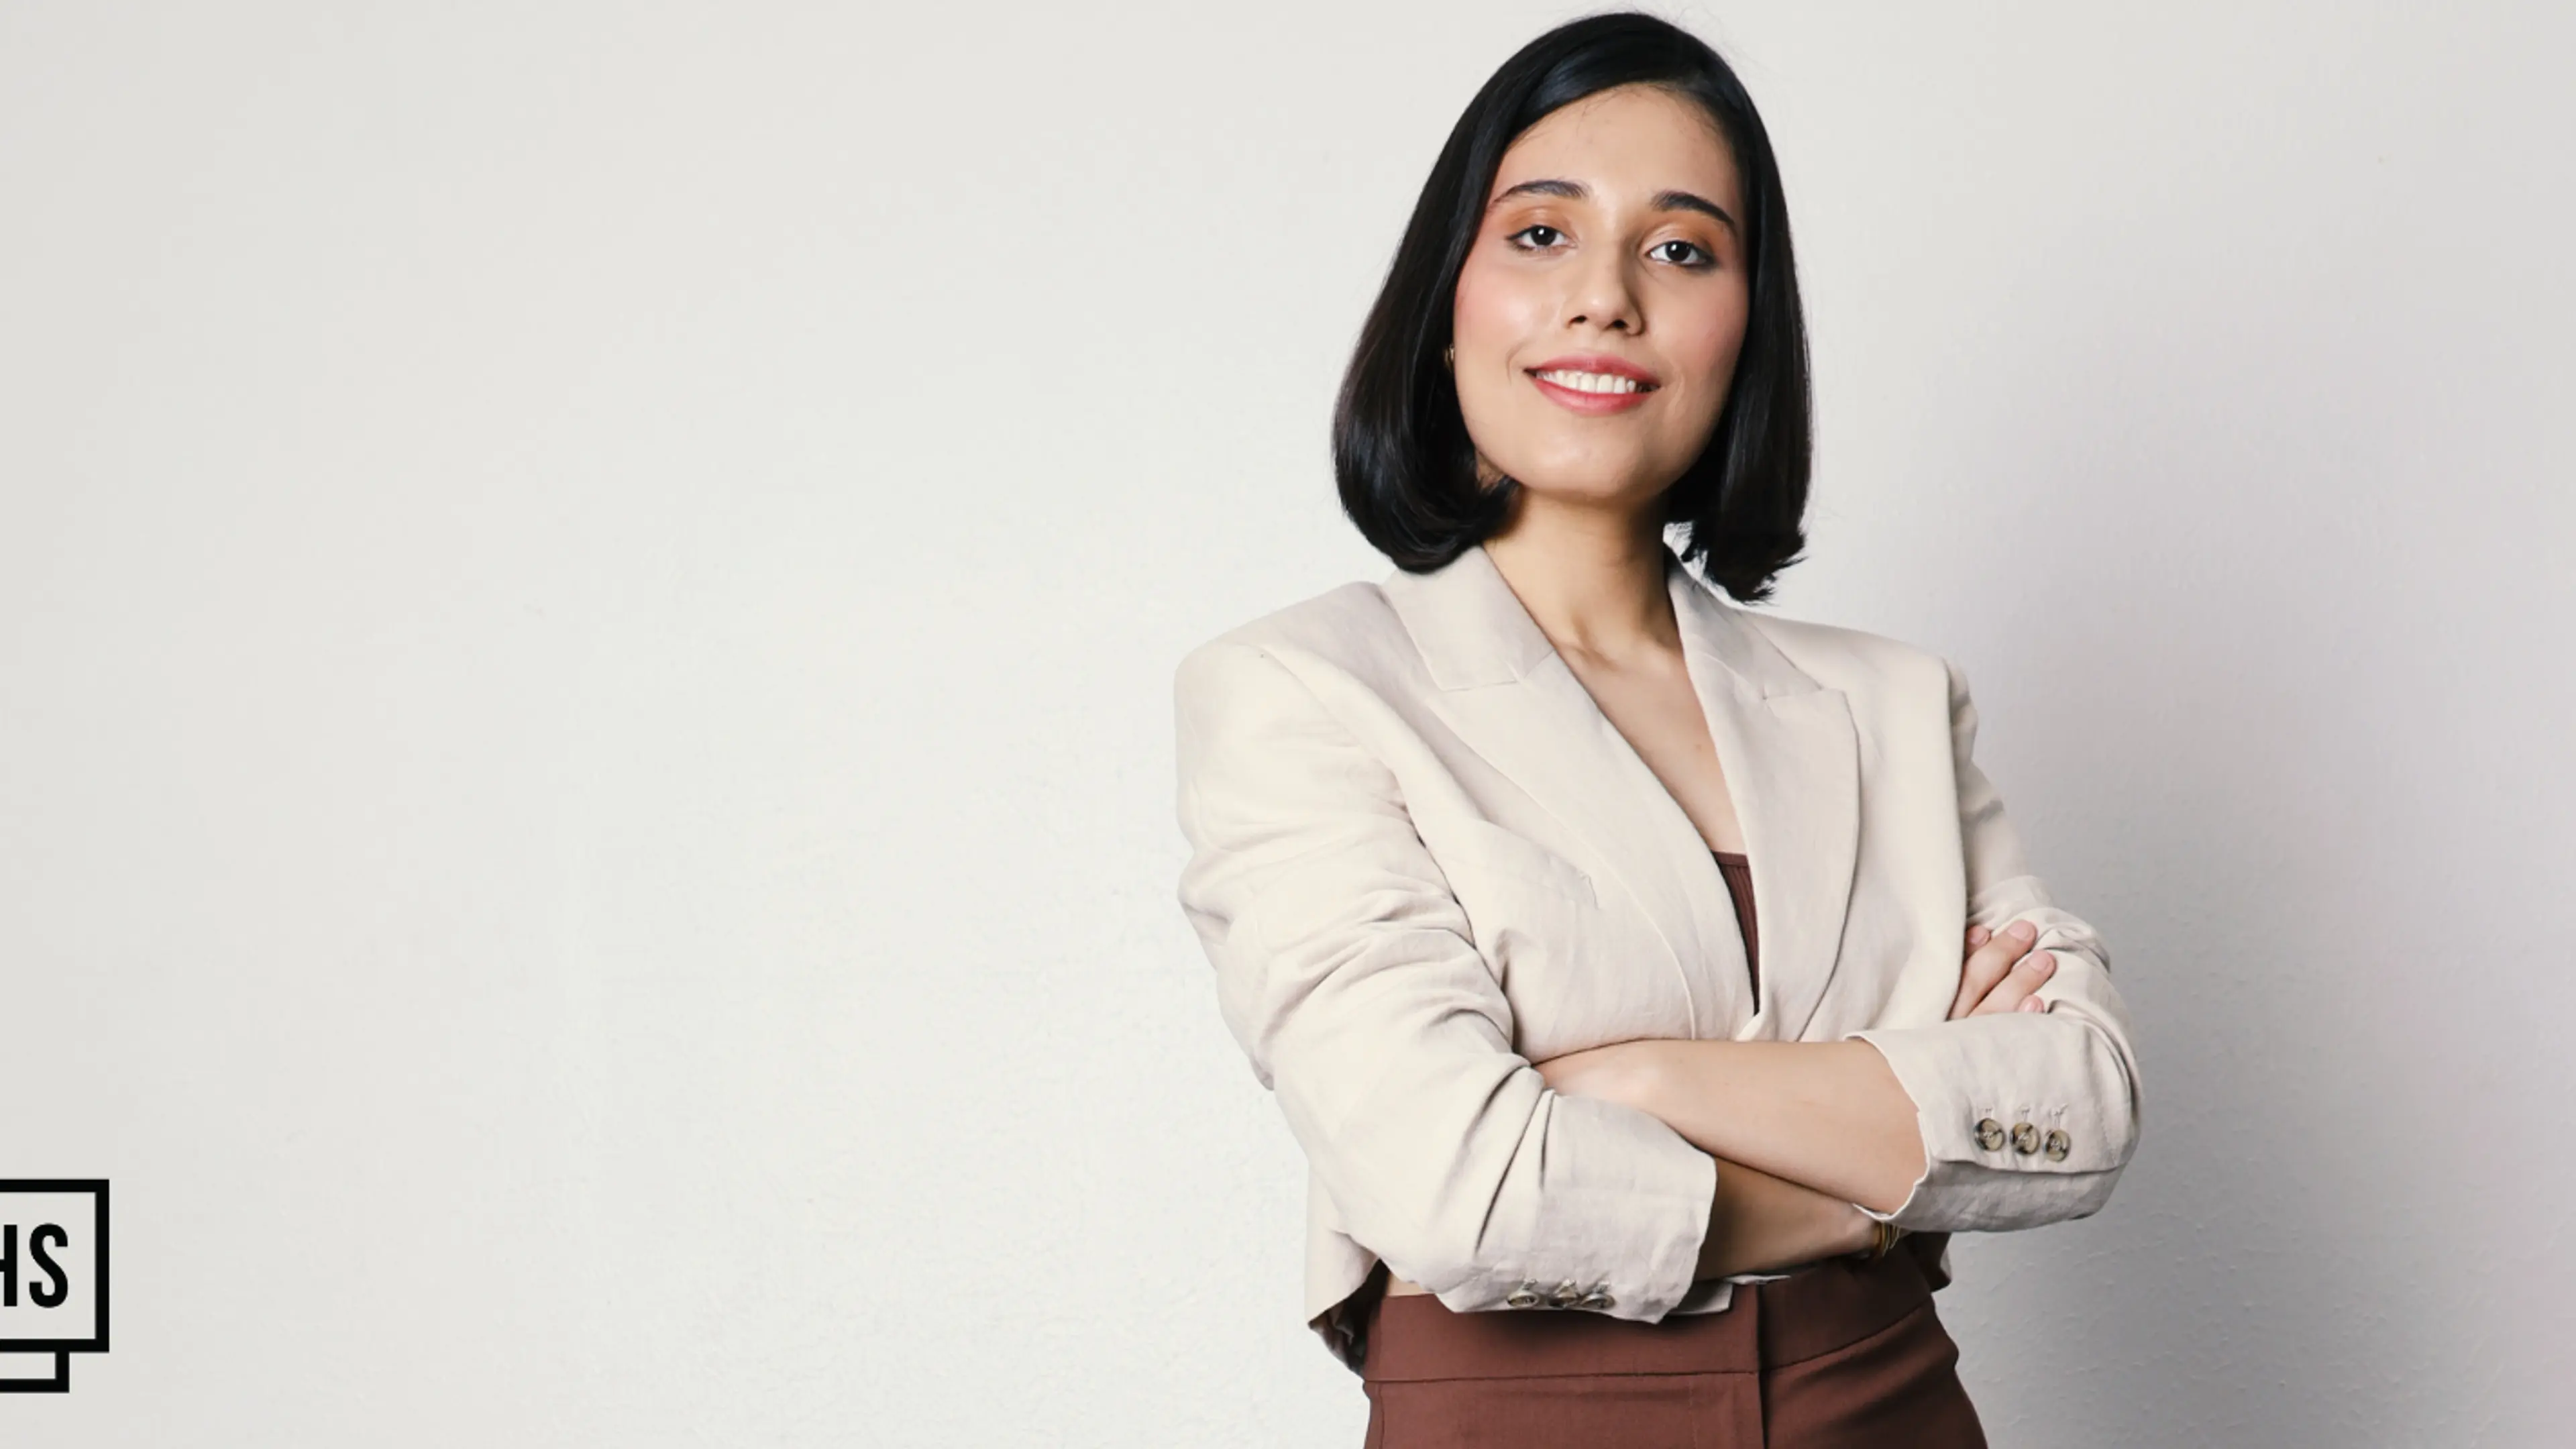 It’s all in the family: Saloni Gaur’s new podcast cuts across three generations